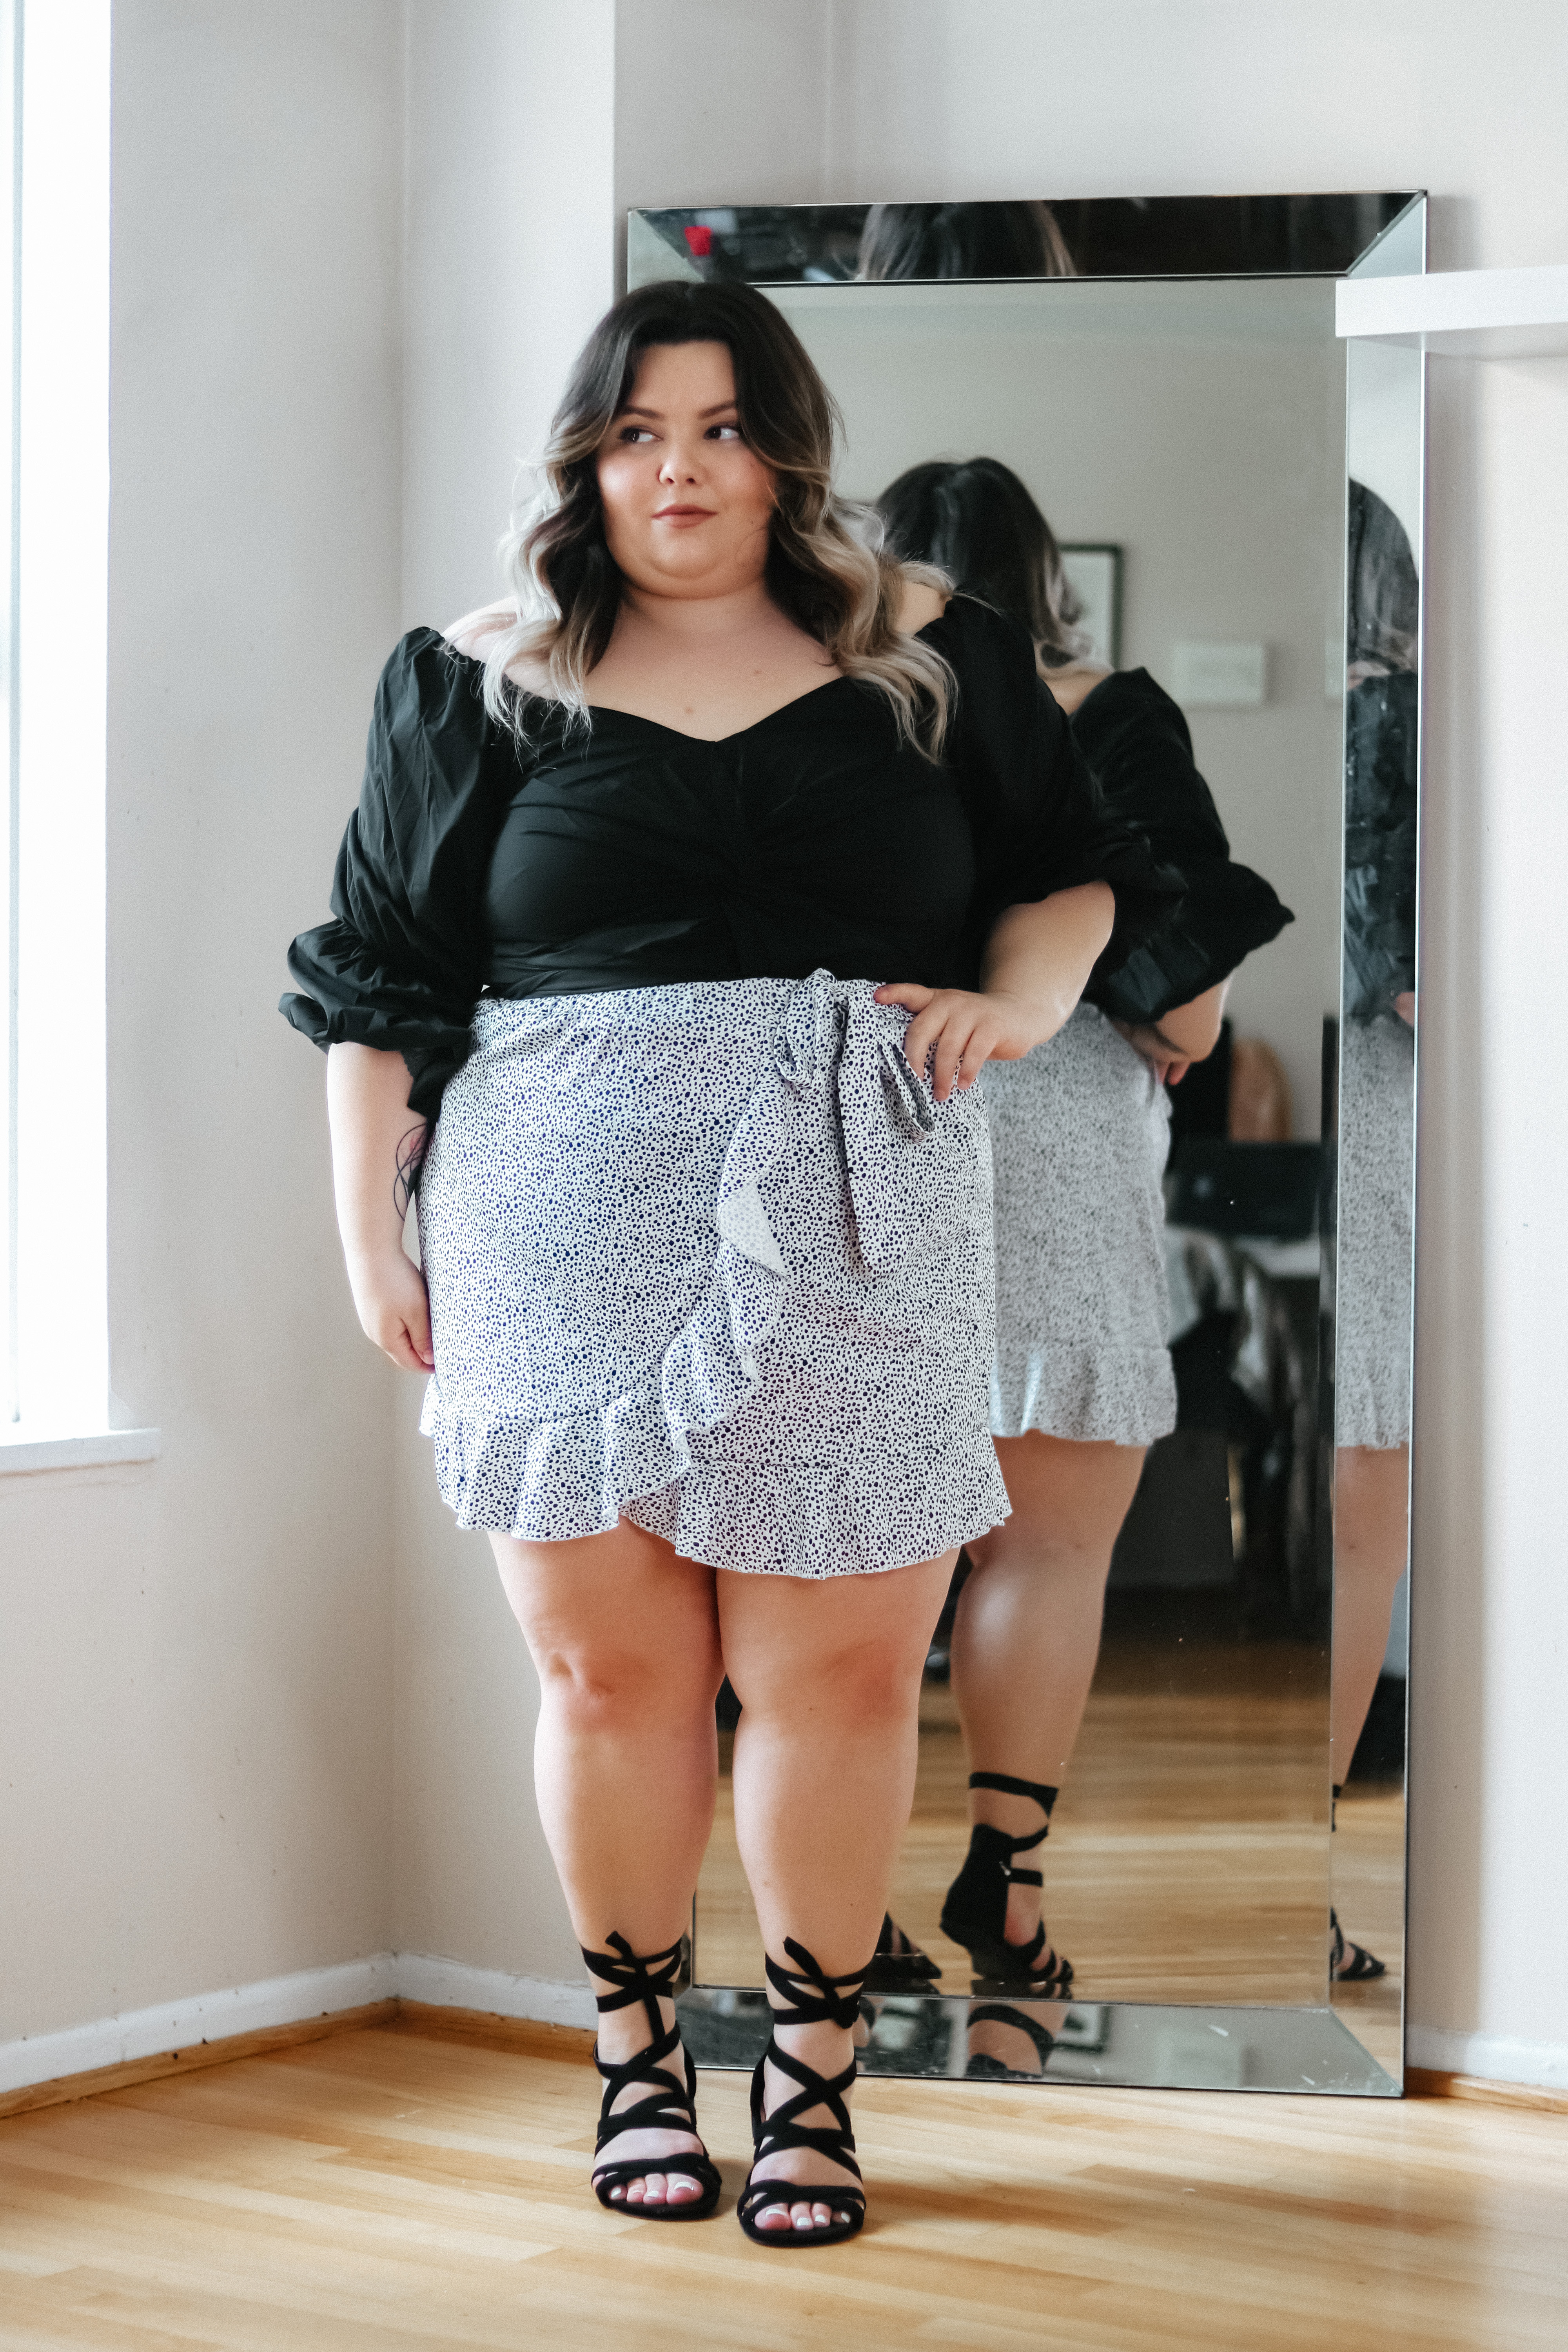 Chicago Plus Size Petite Fashion Blogger and model Natalie Craig, of Natalie in the City, reviews SHEIN's mini skirts